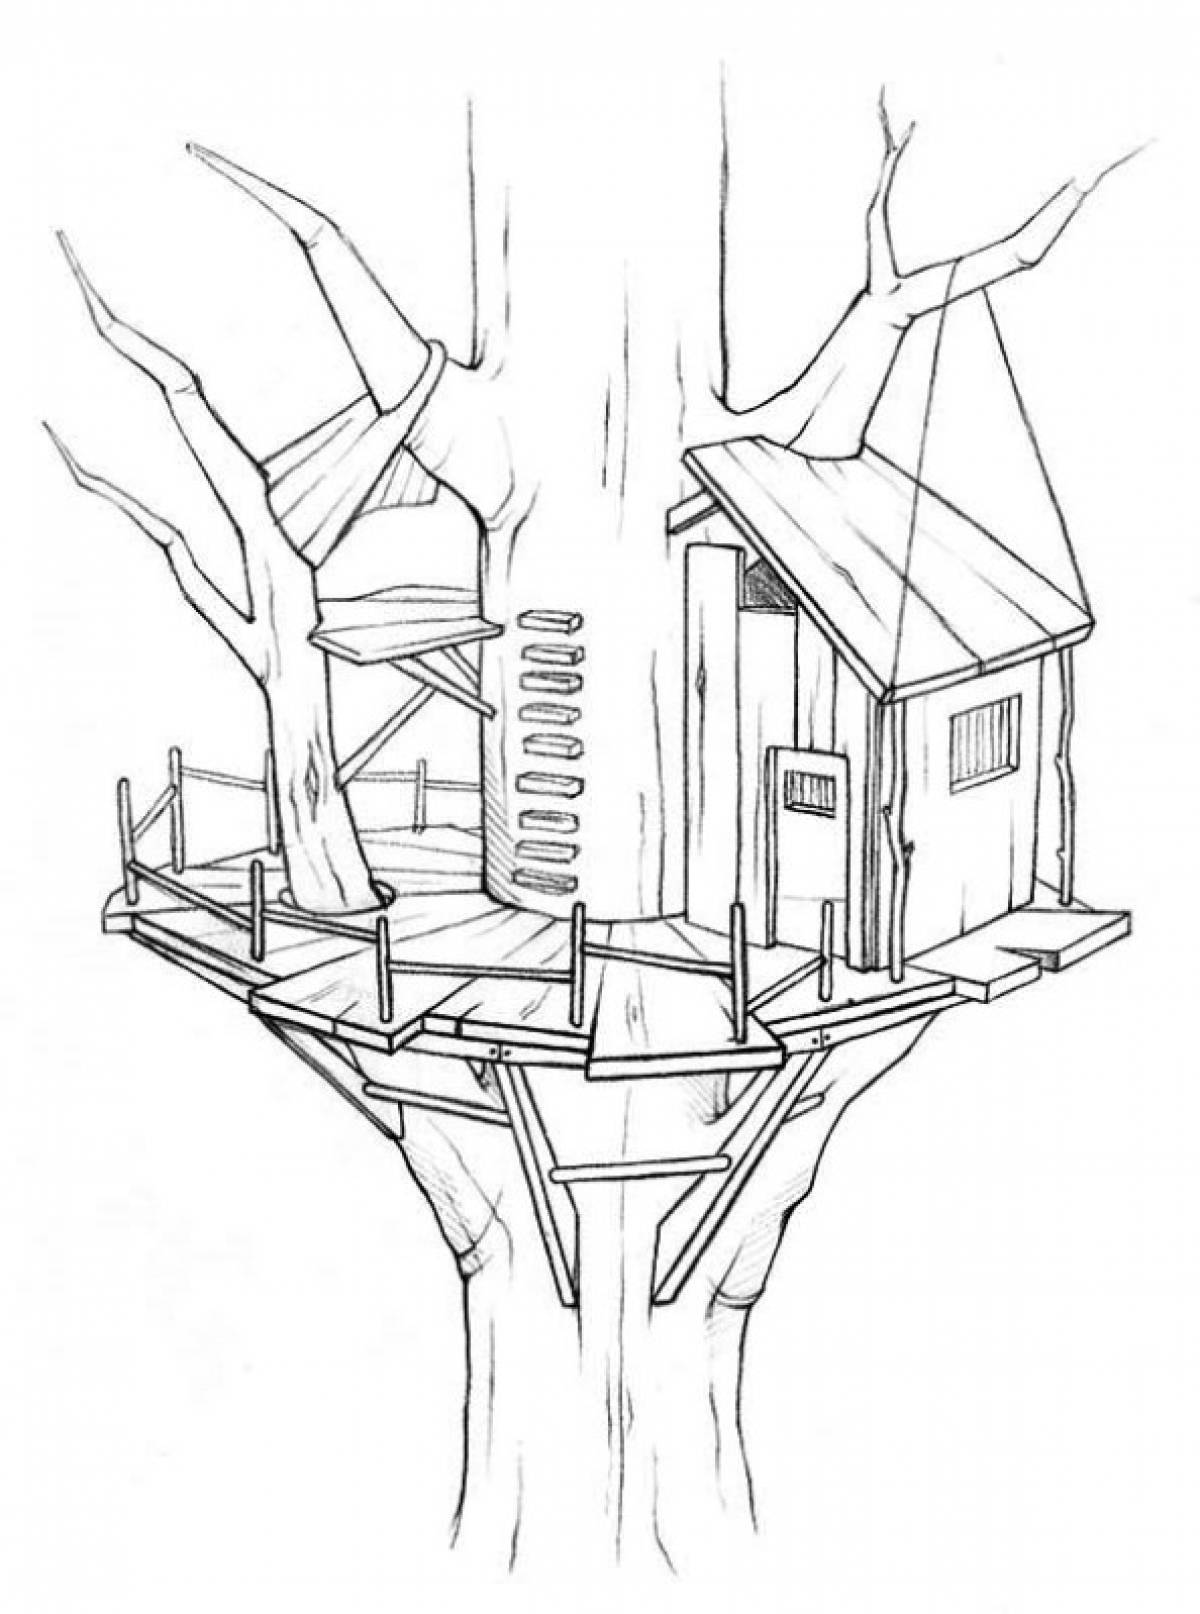 Treehouse Coloring Pages